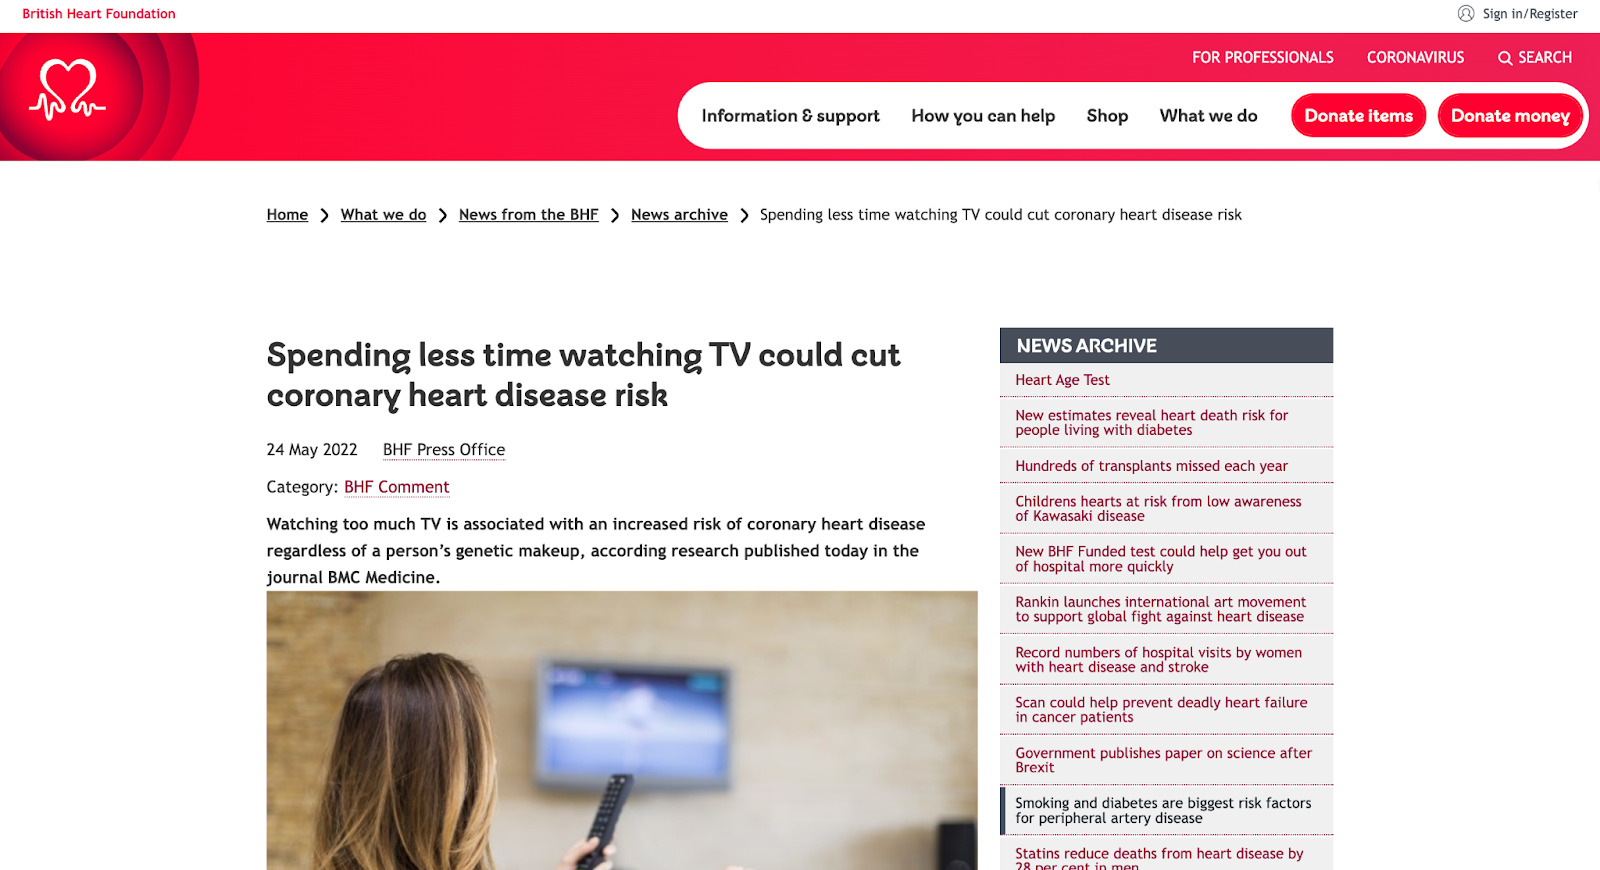 How to Use Data in Content Creation: BHF showing connection and correlation between TV and heart disease